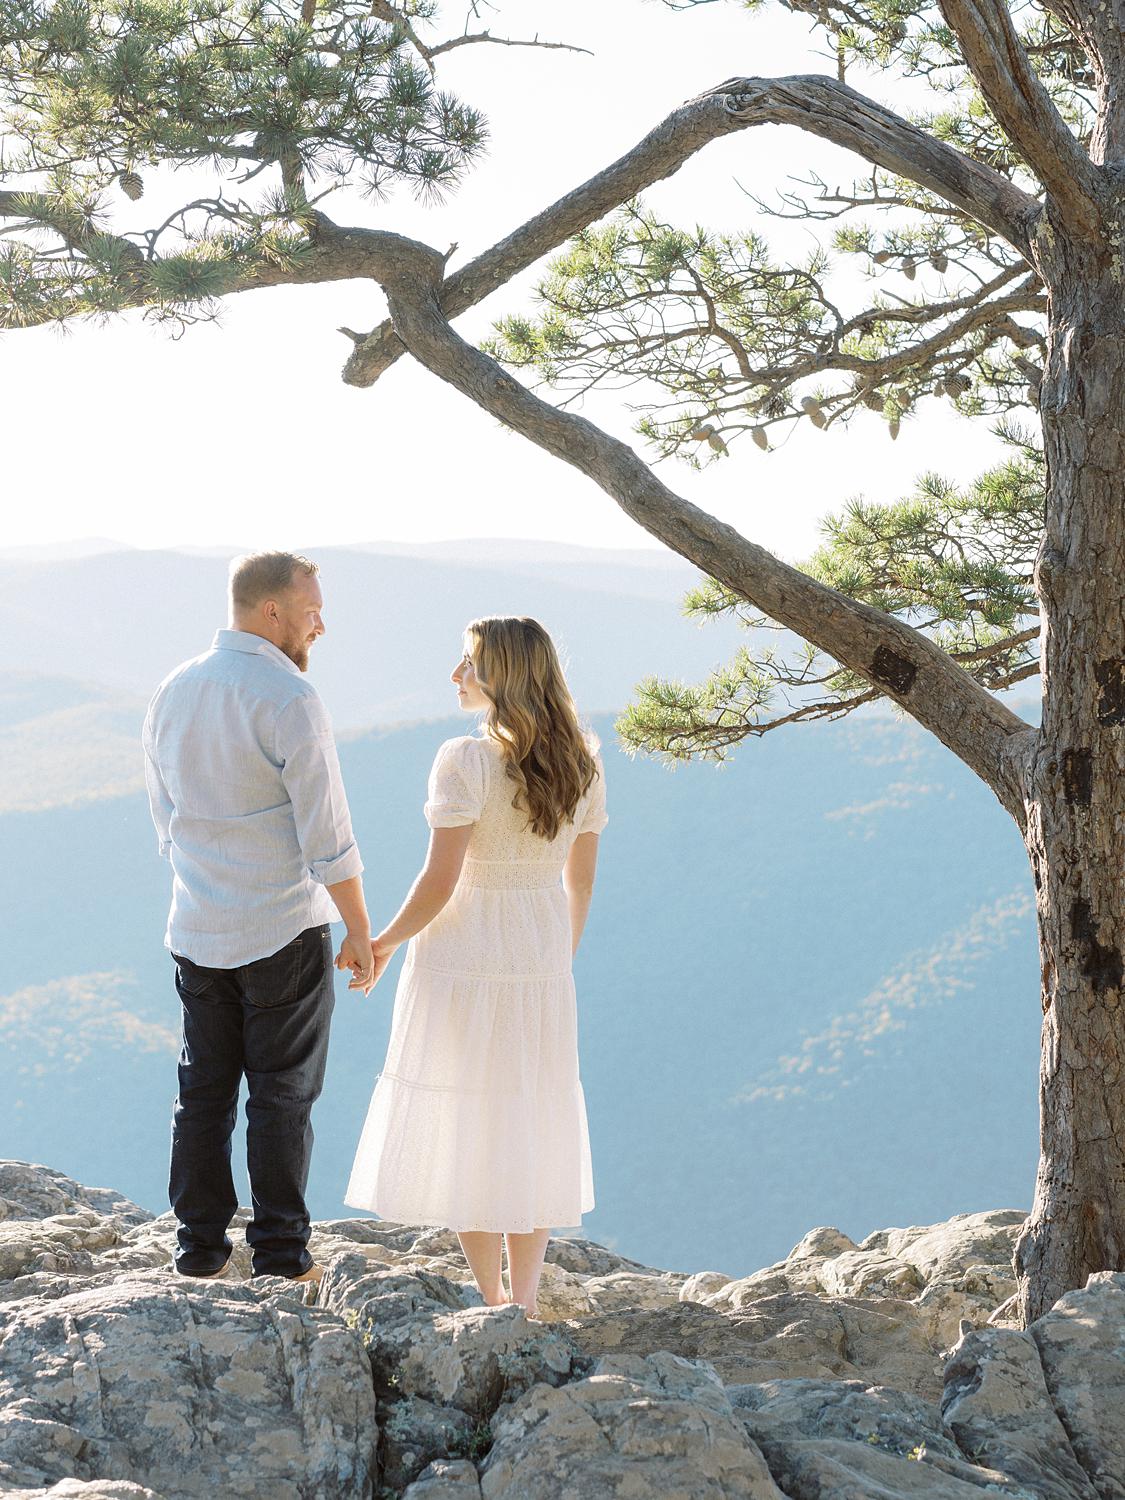 Bride and groom holding hands looking out on the Blue Ridge Mountains during their engagement session at Ravens Roost.